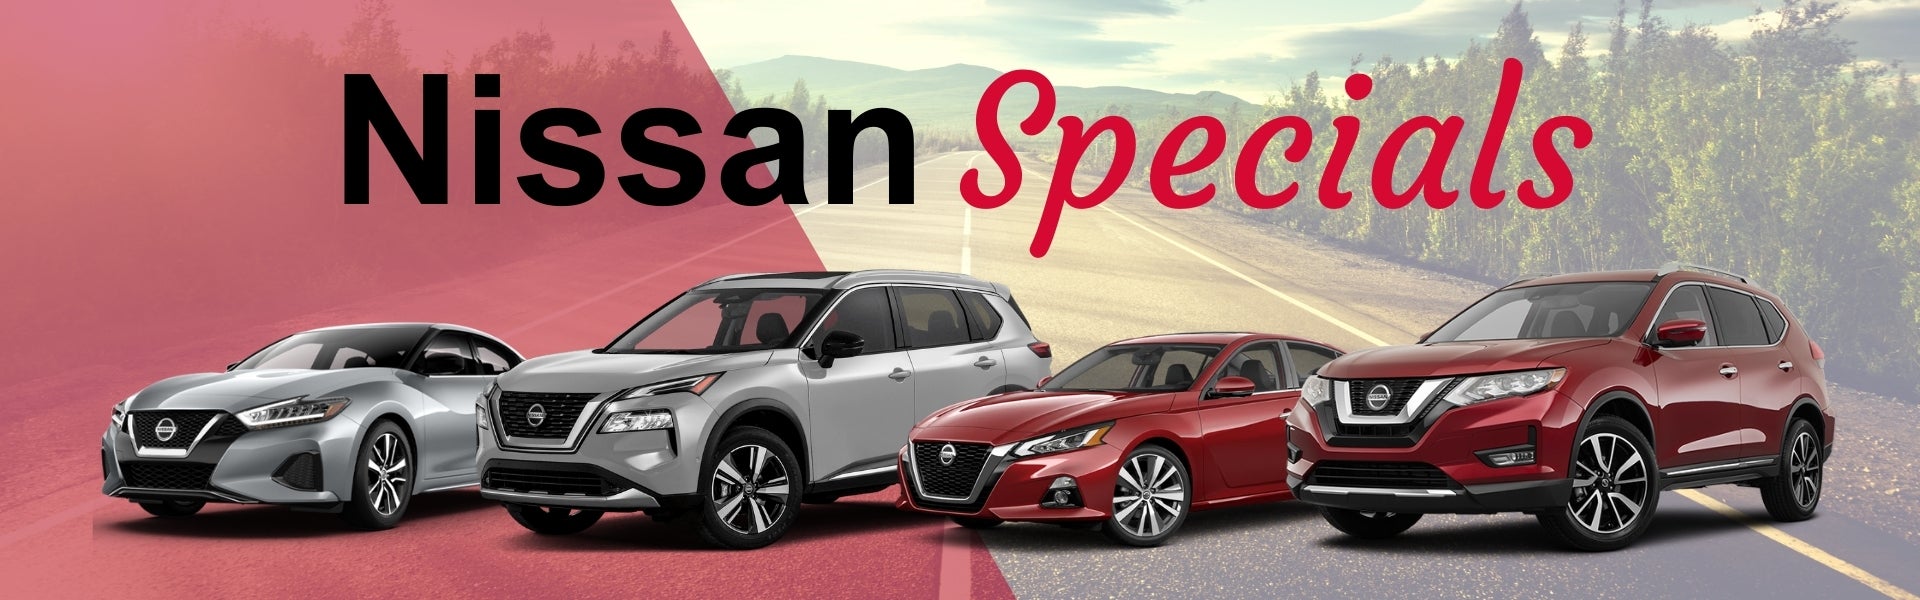 2021 Nissan Specials Lease and Finance Deals